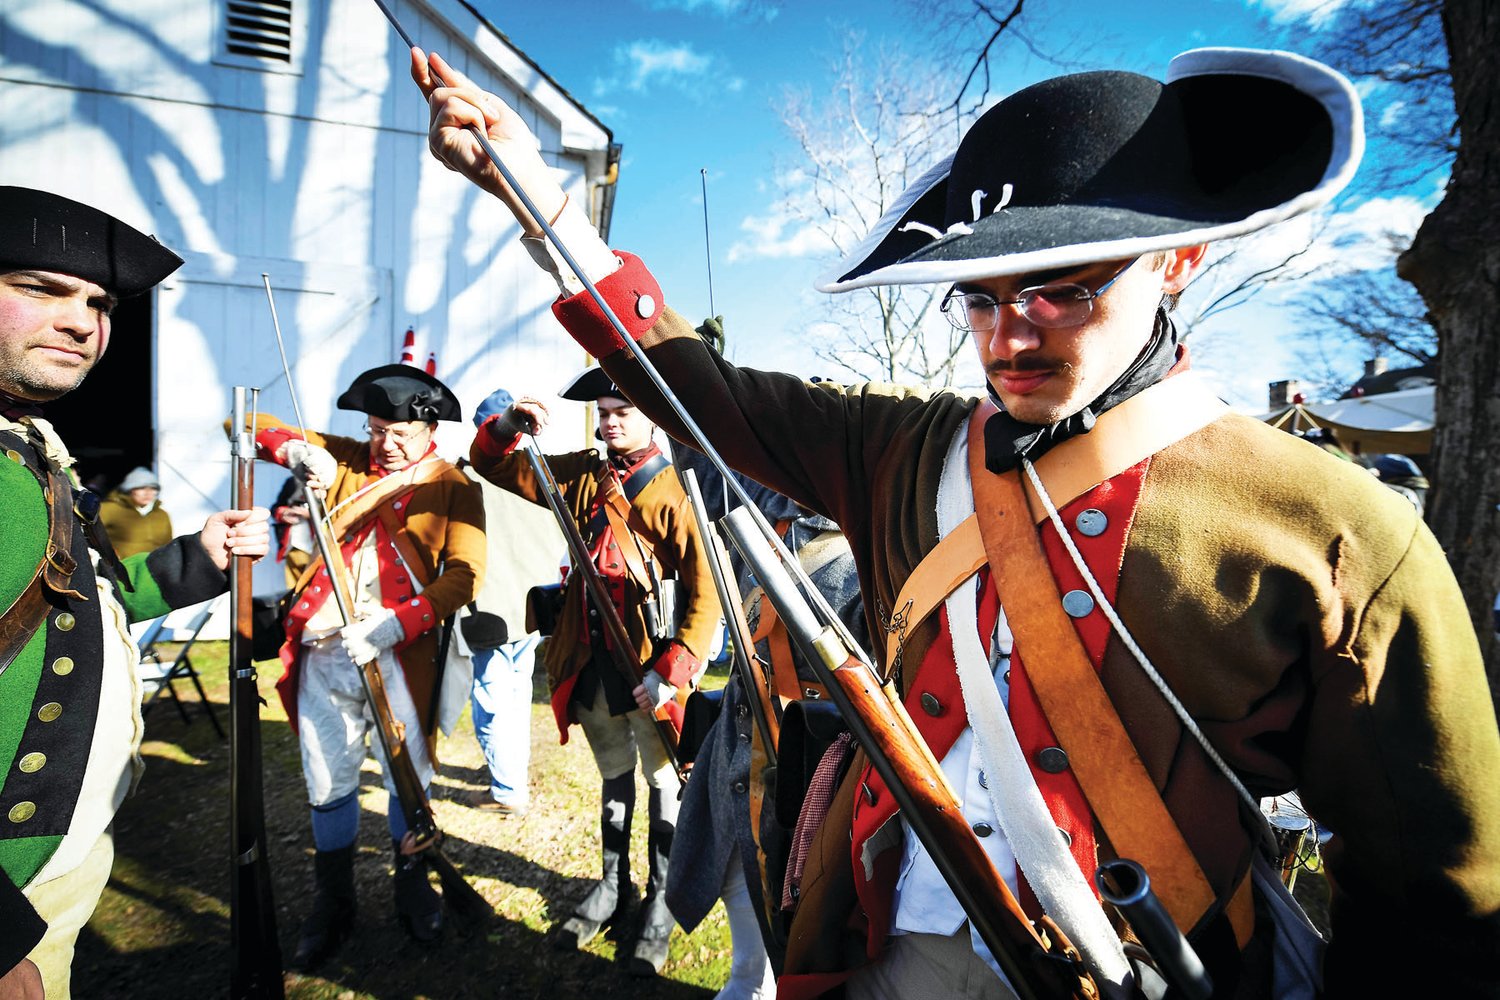 The troops prepare their muskets with blank ammo before marching into position.